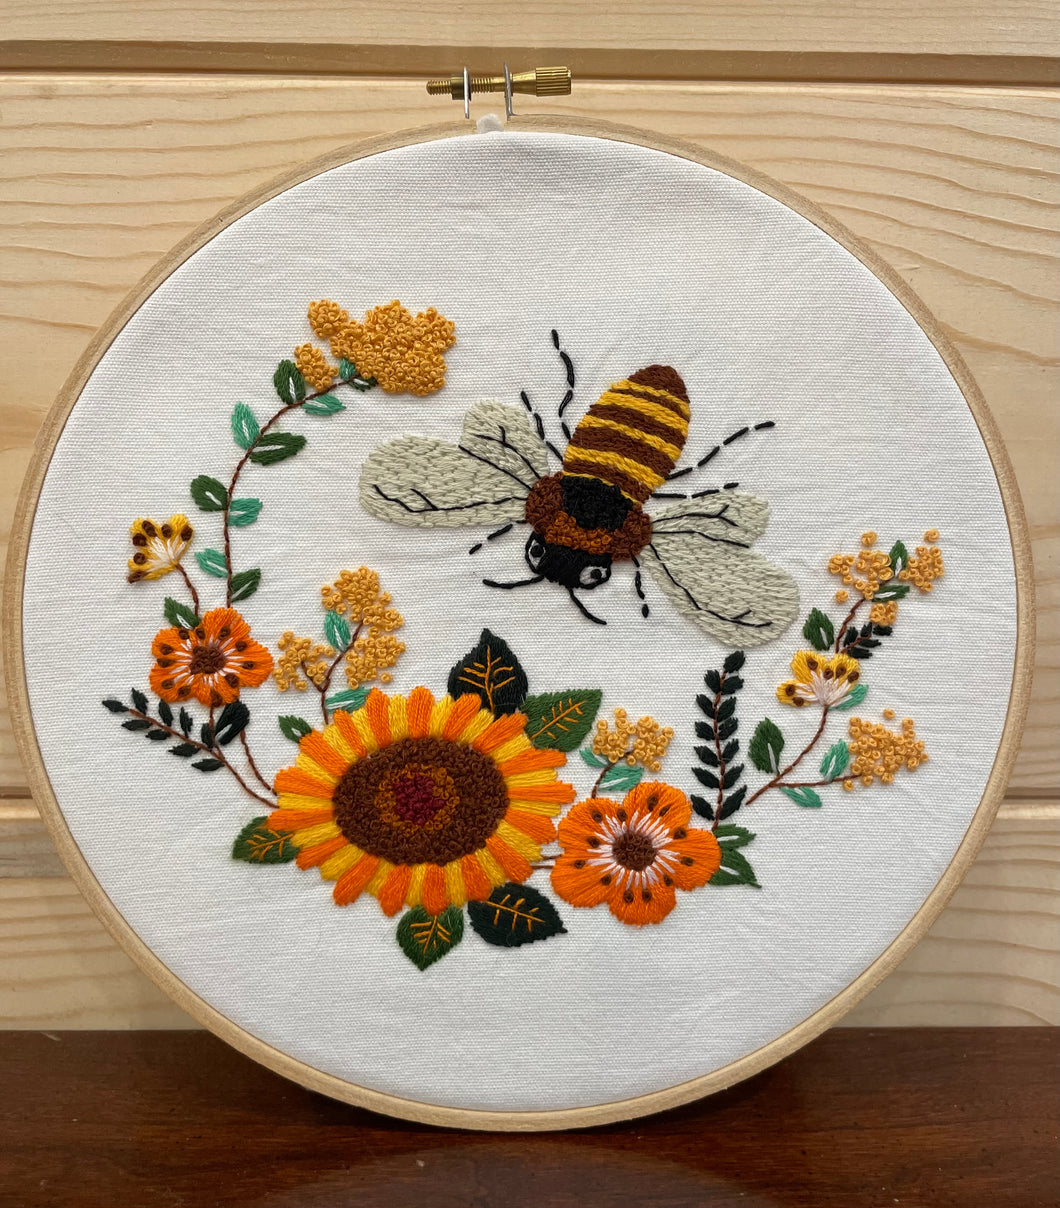 Learn to Embroider Hand Class 5/29 3-6 CST